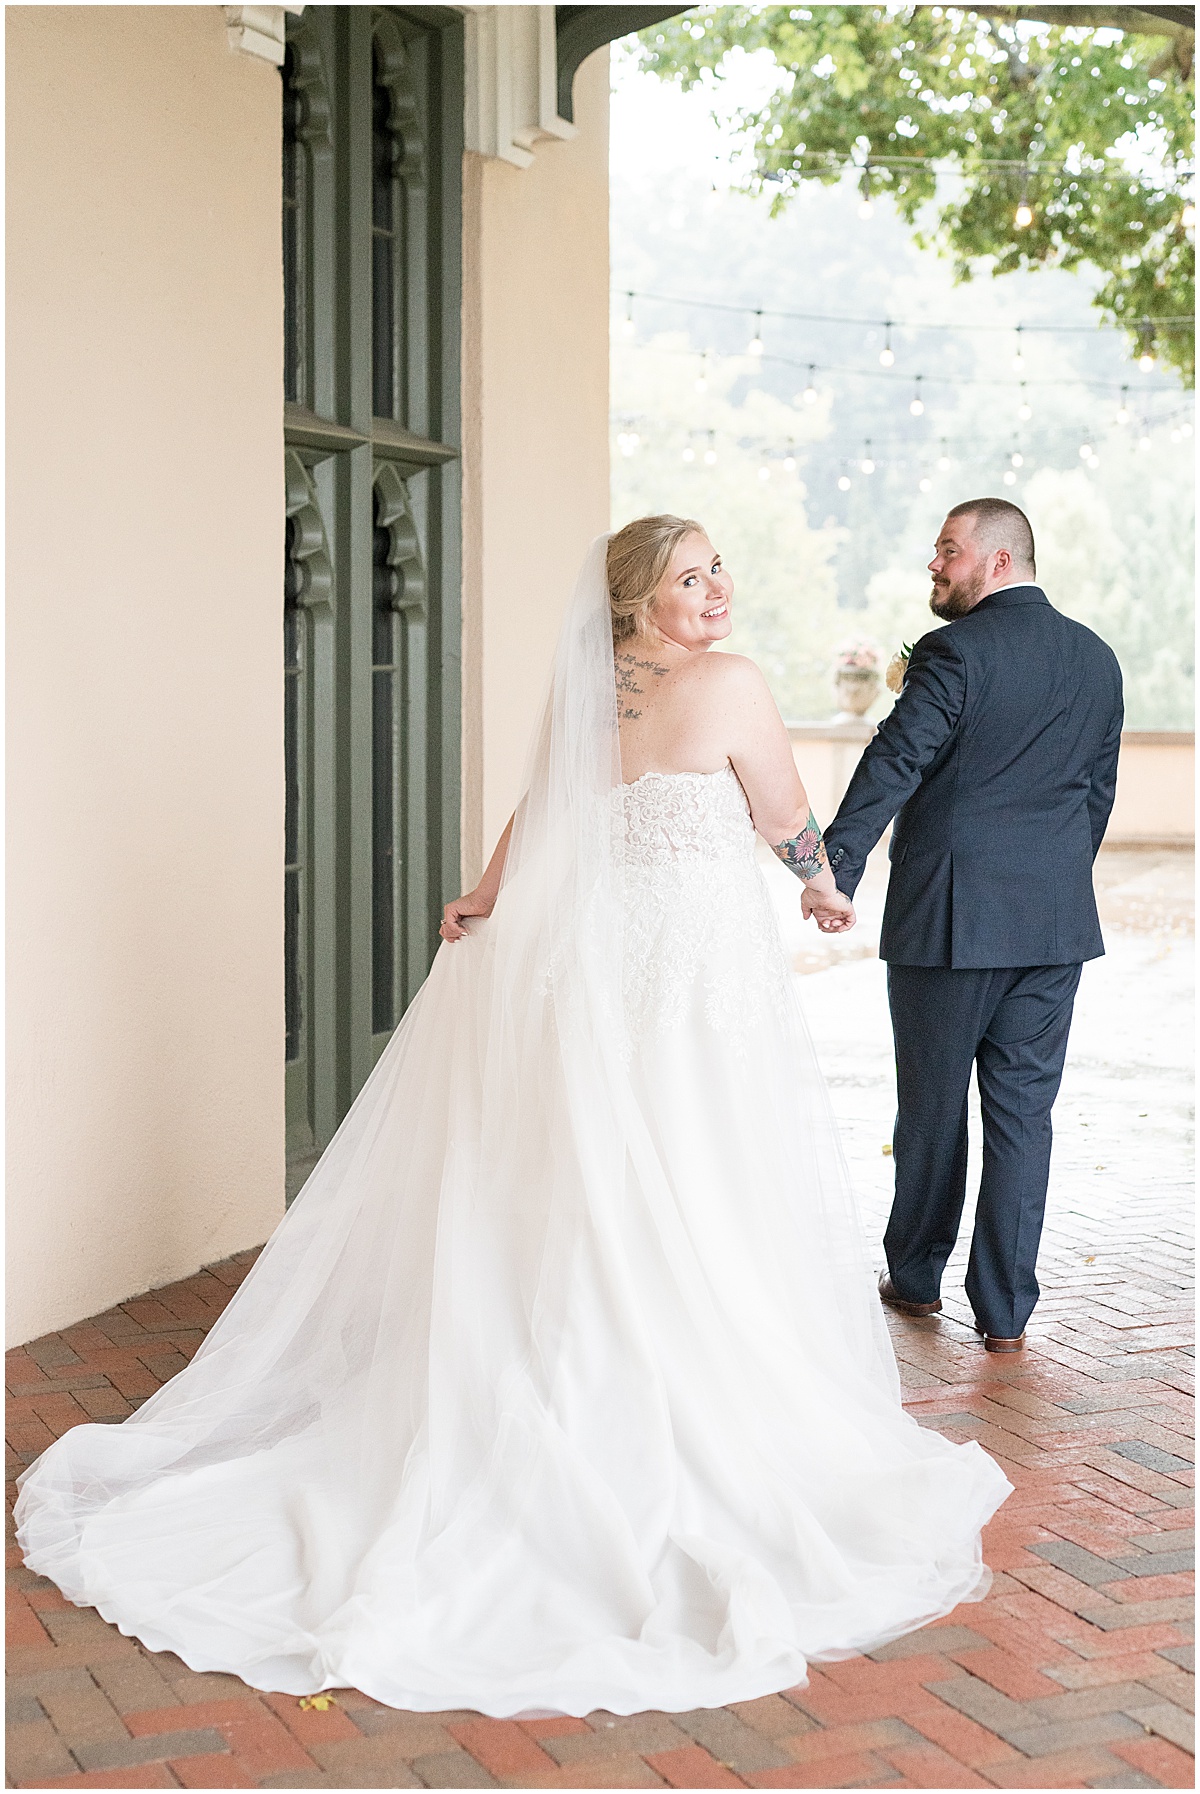 Just married photos after Fowler House Mansion wedding in Lafayette, Indiana by Victoria Rayburn Photography